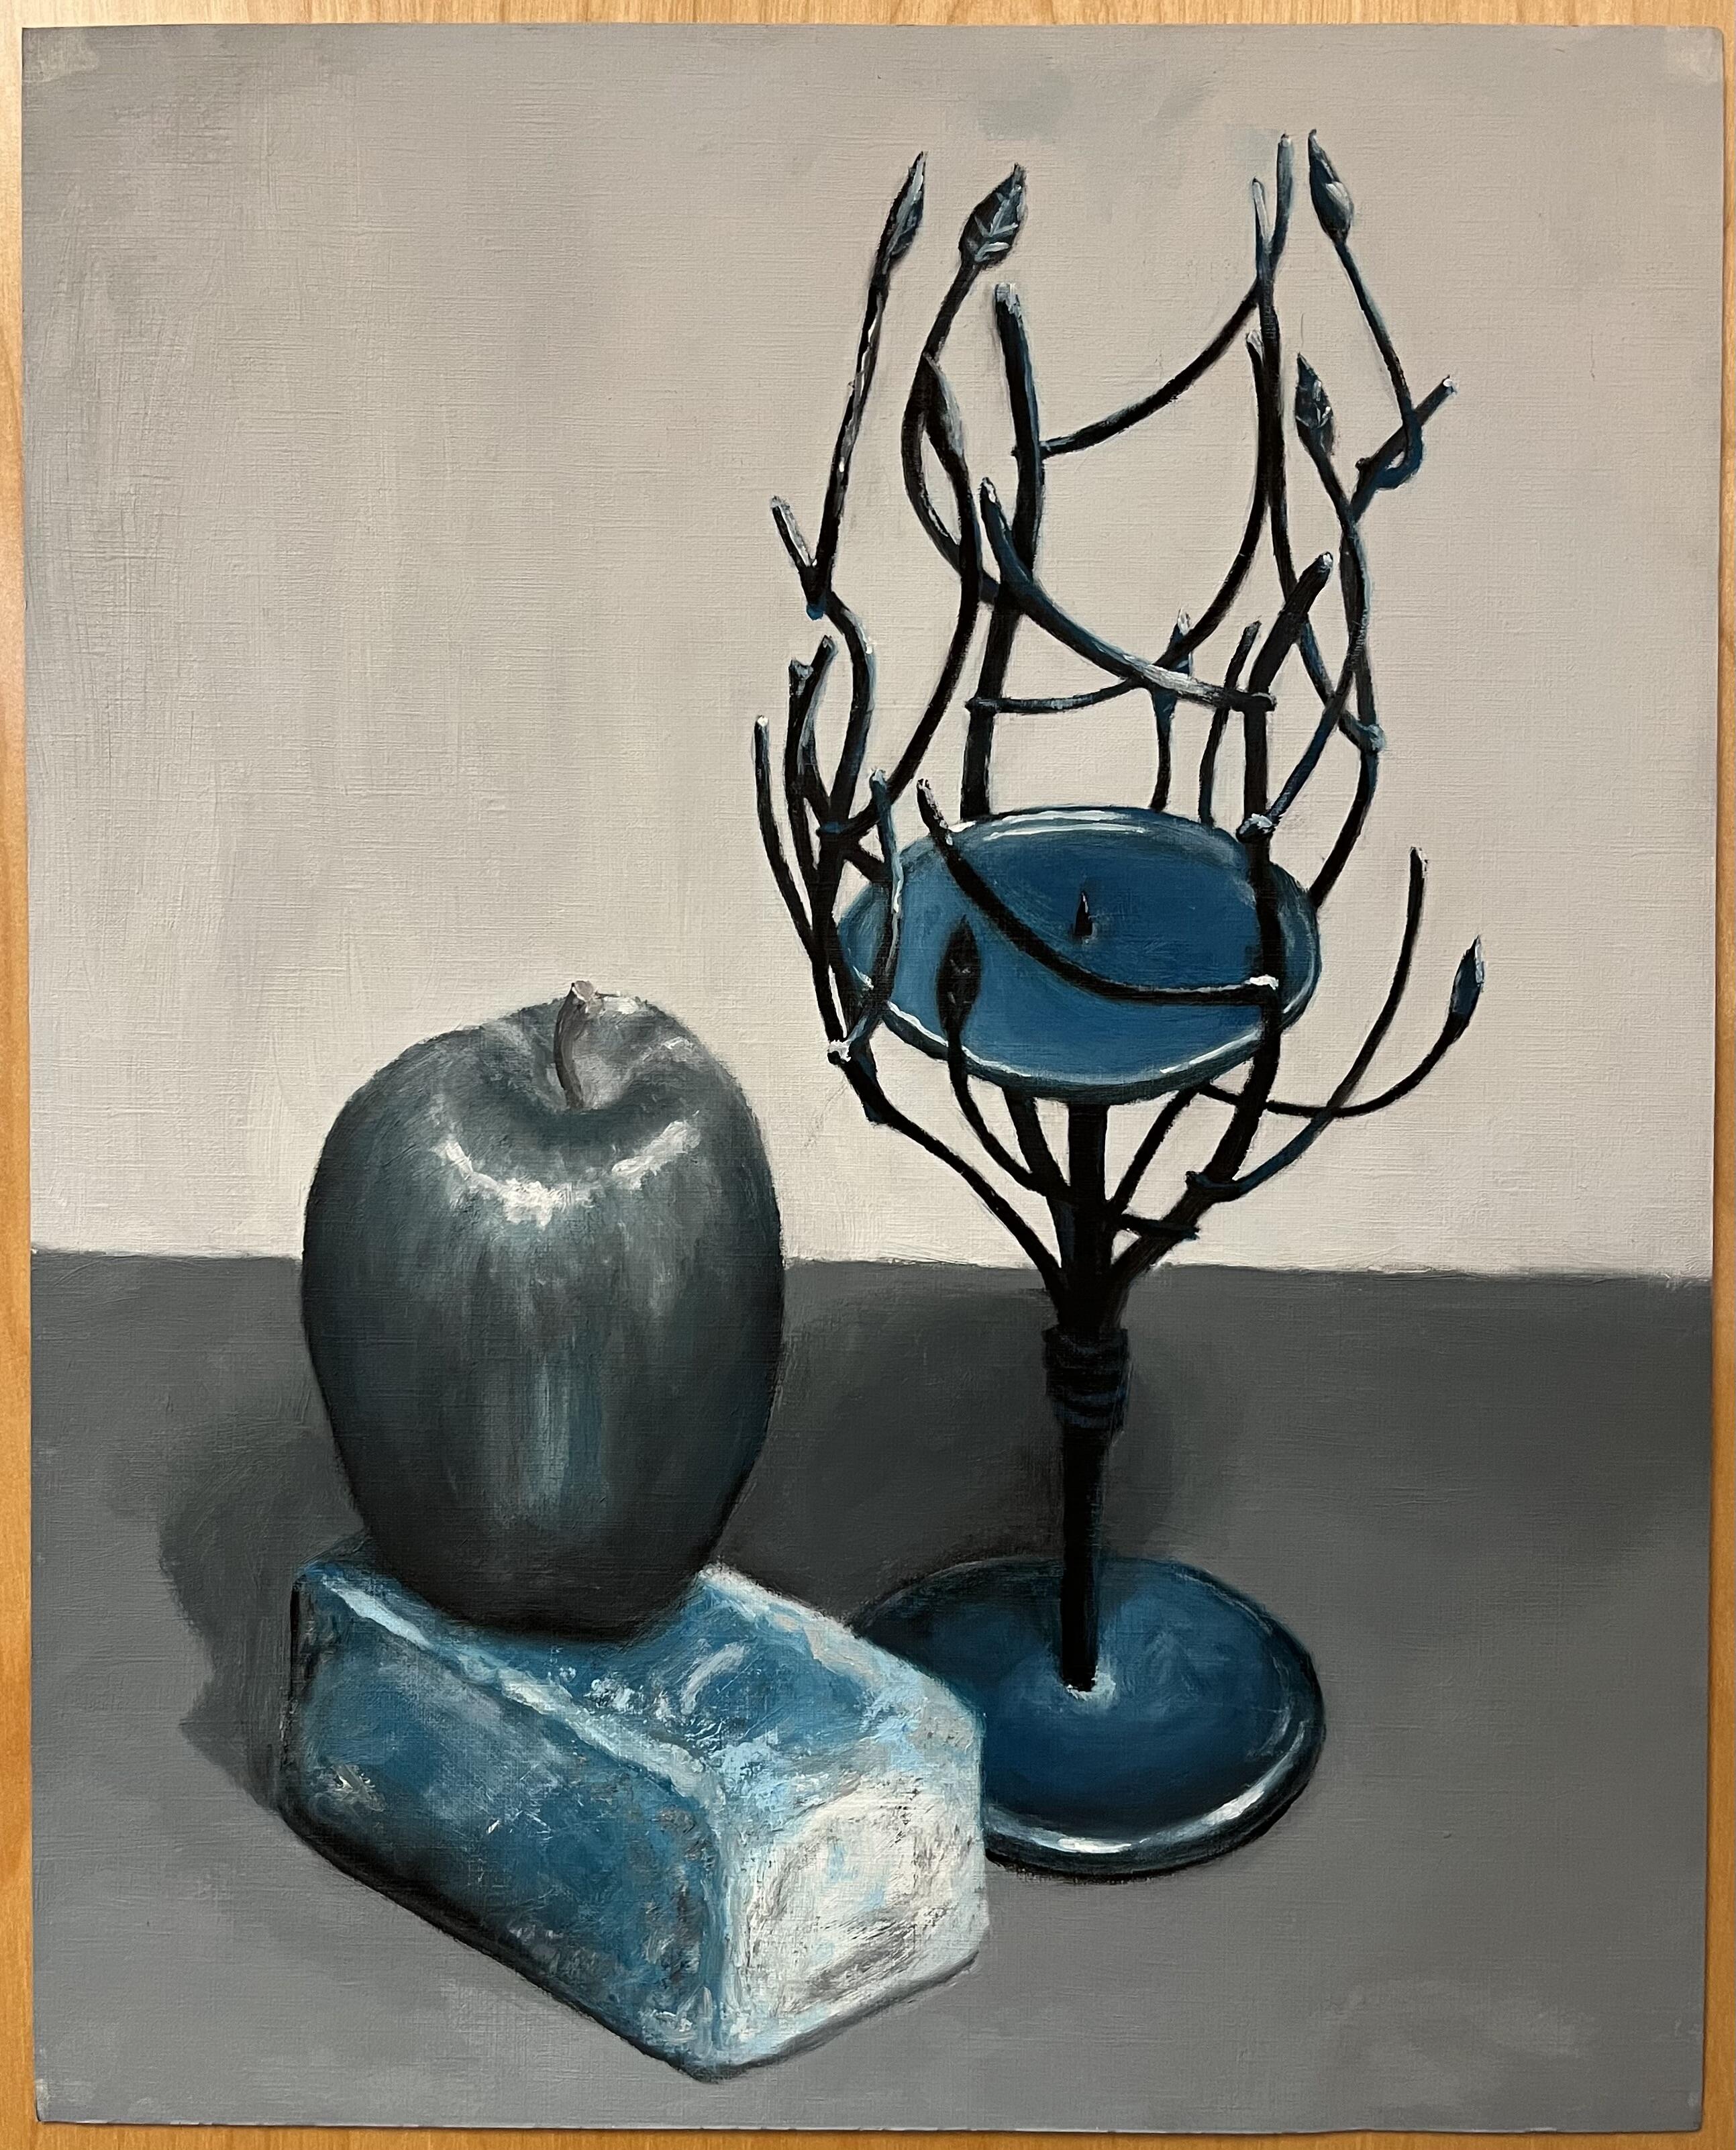 painting of apple and other objects